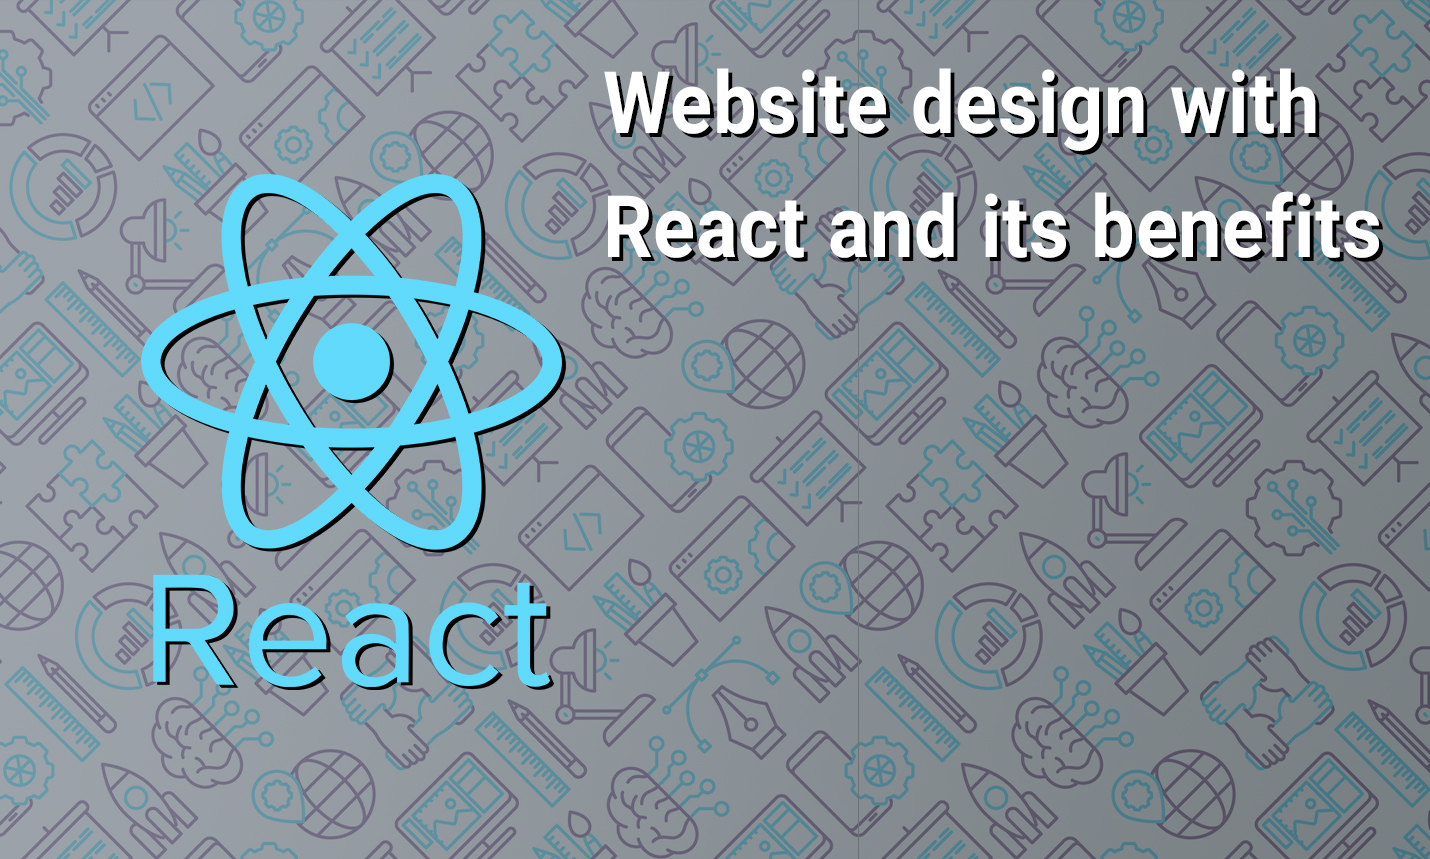 Website design with React and its benefits